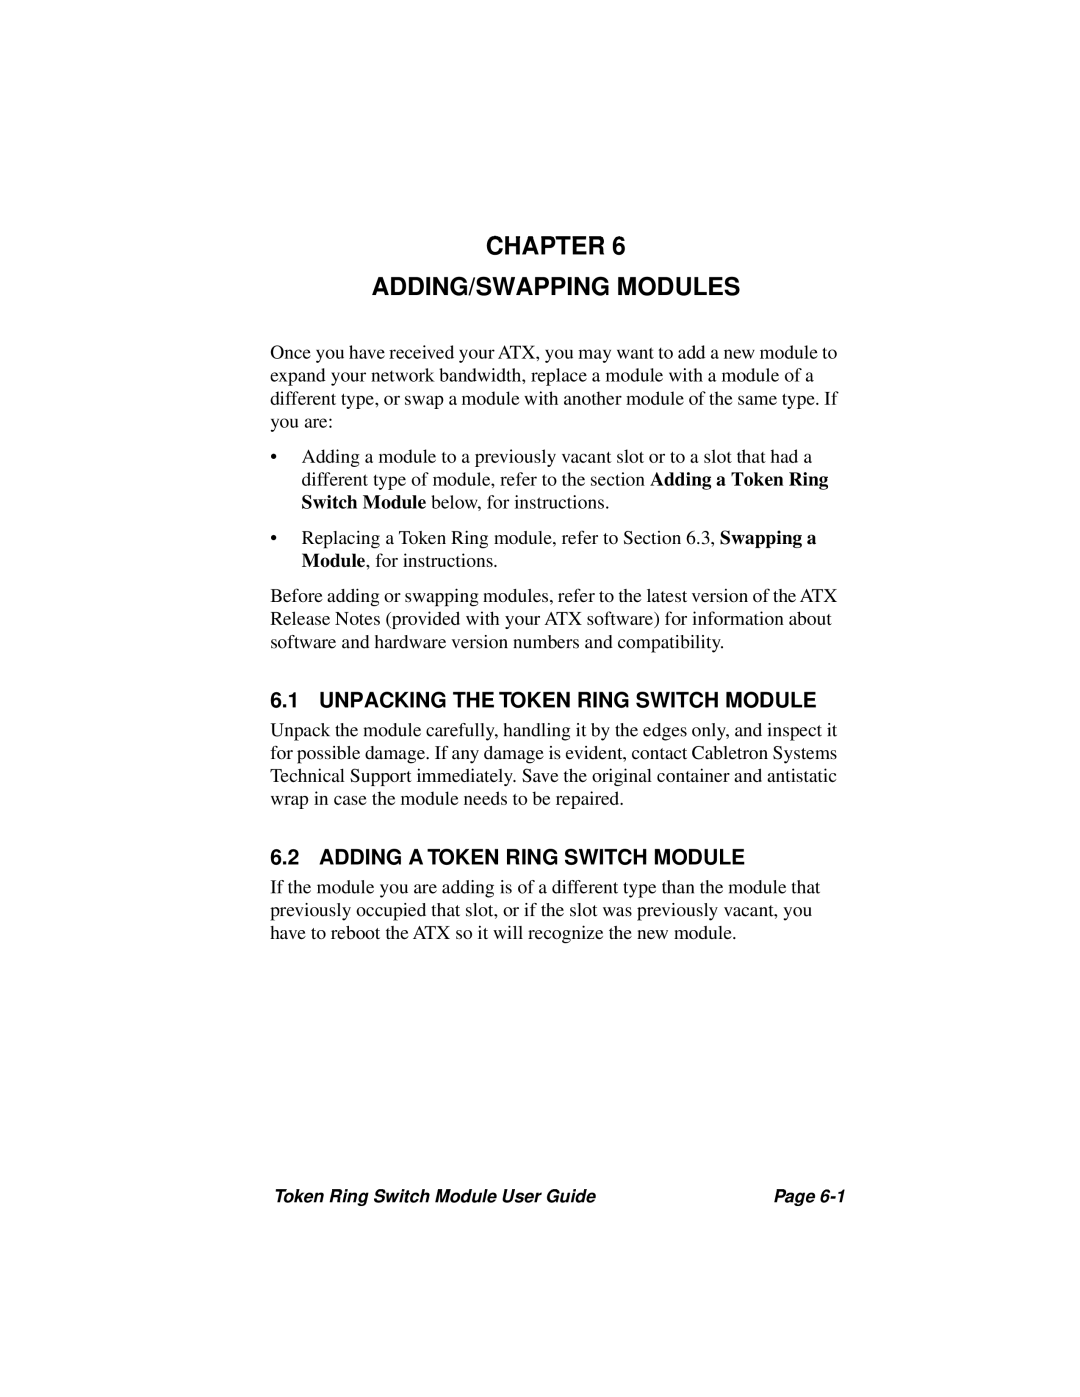 Cabletron Systems 3T02-04 manual Chapter Adding/Swapping Modules, Unpacking The Token Ring Switch Module 